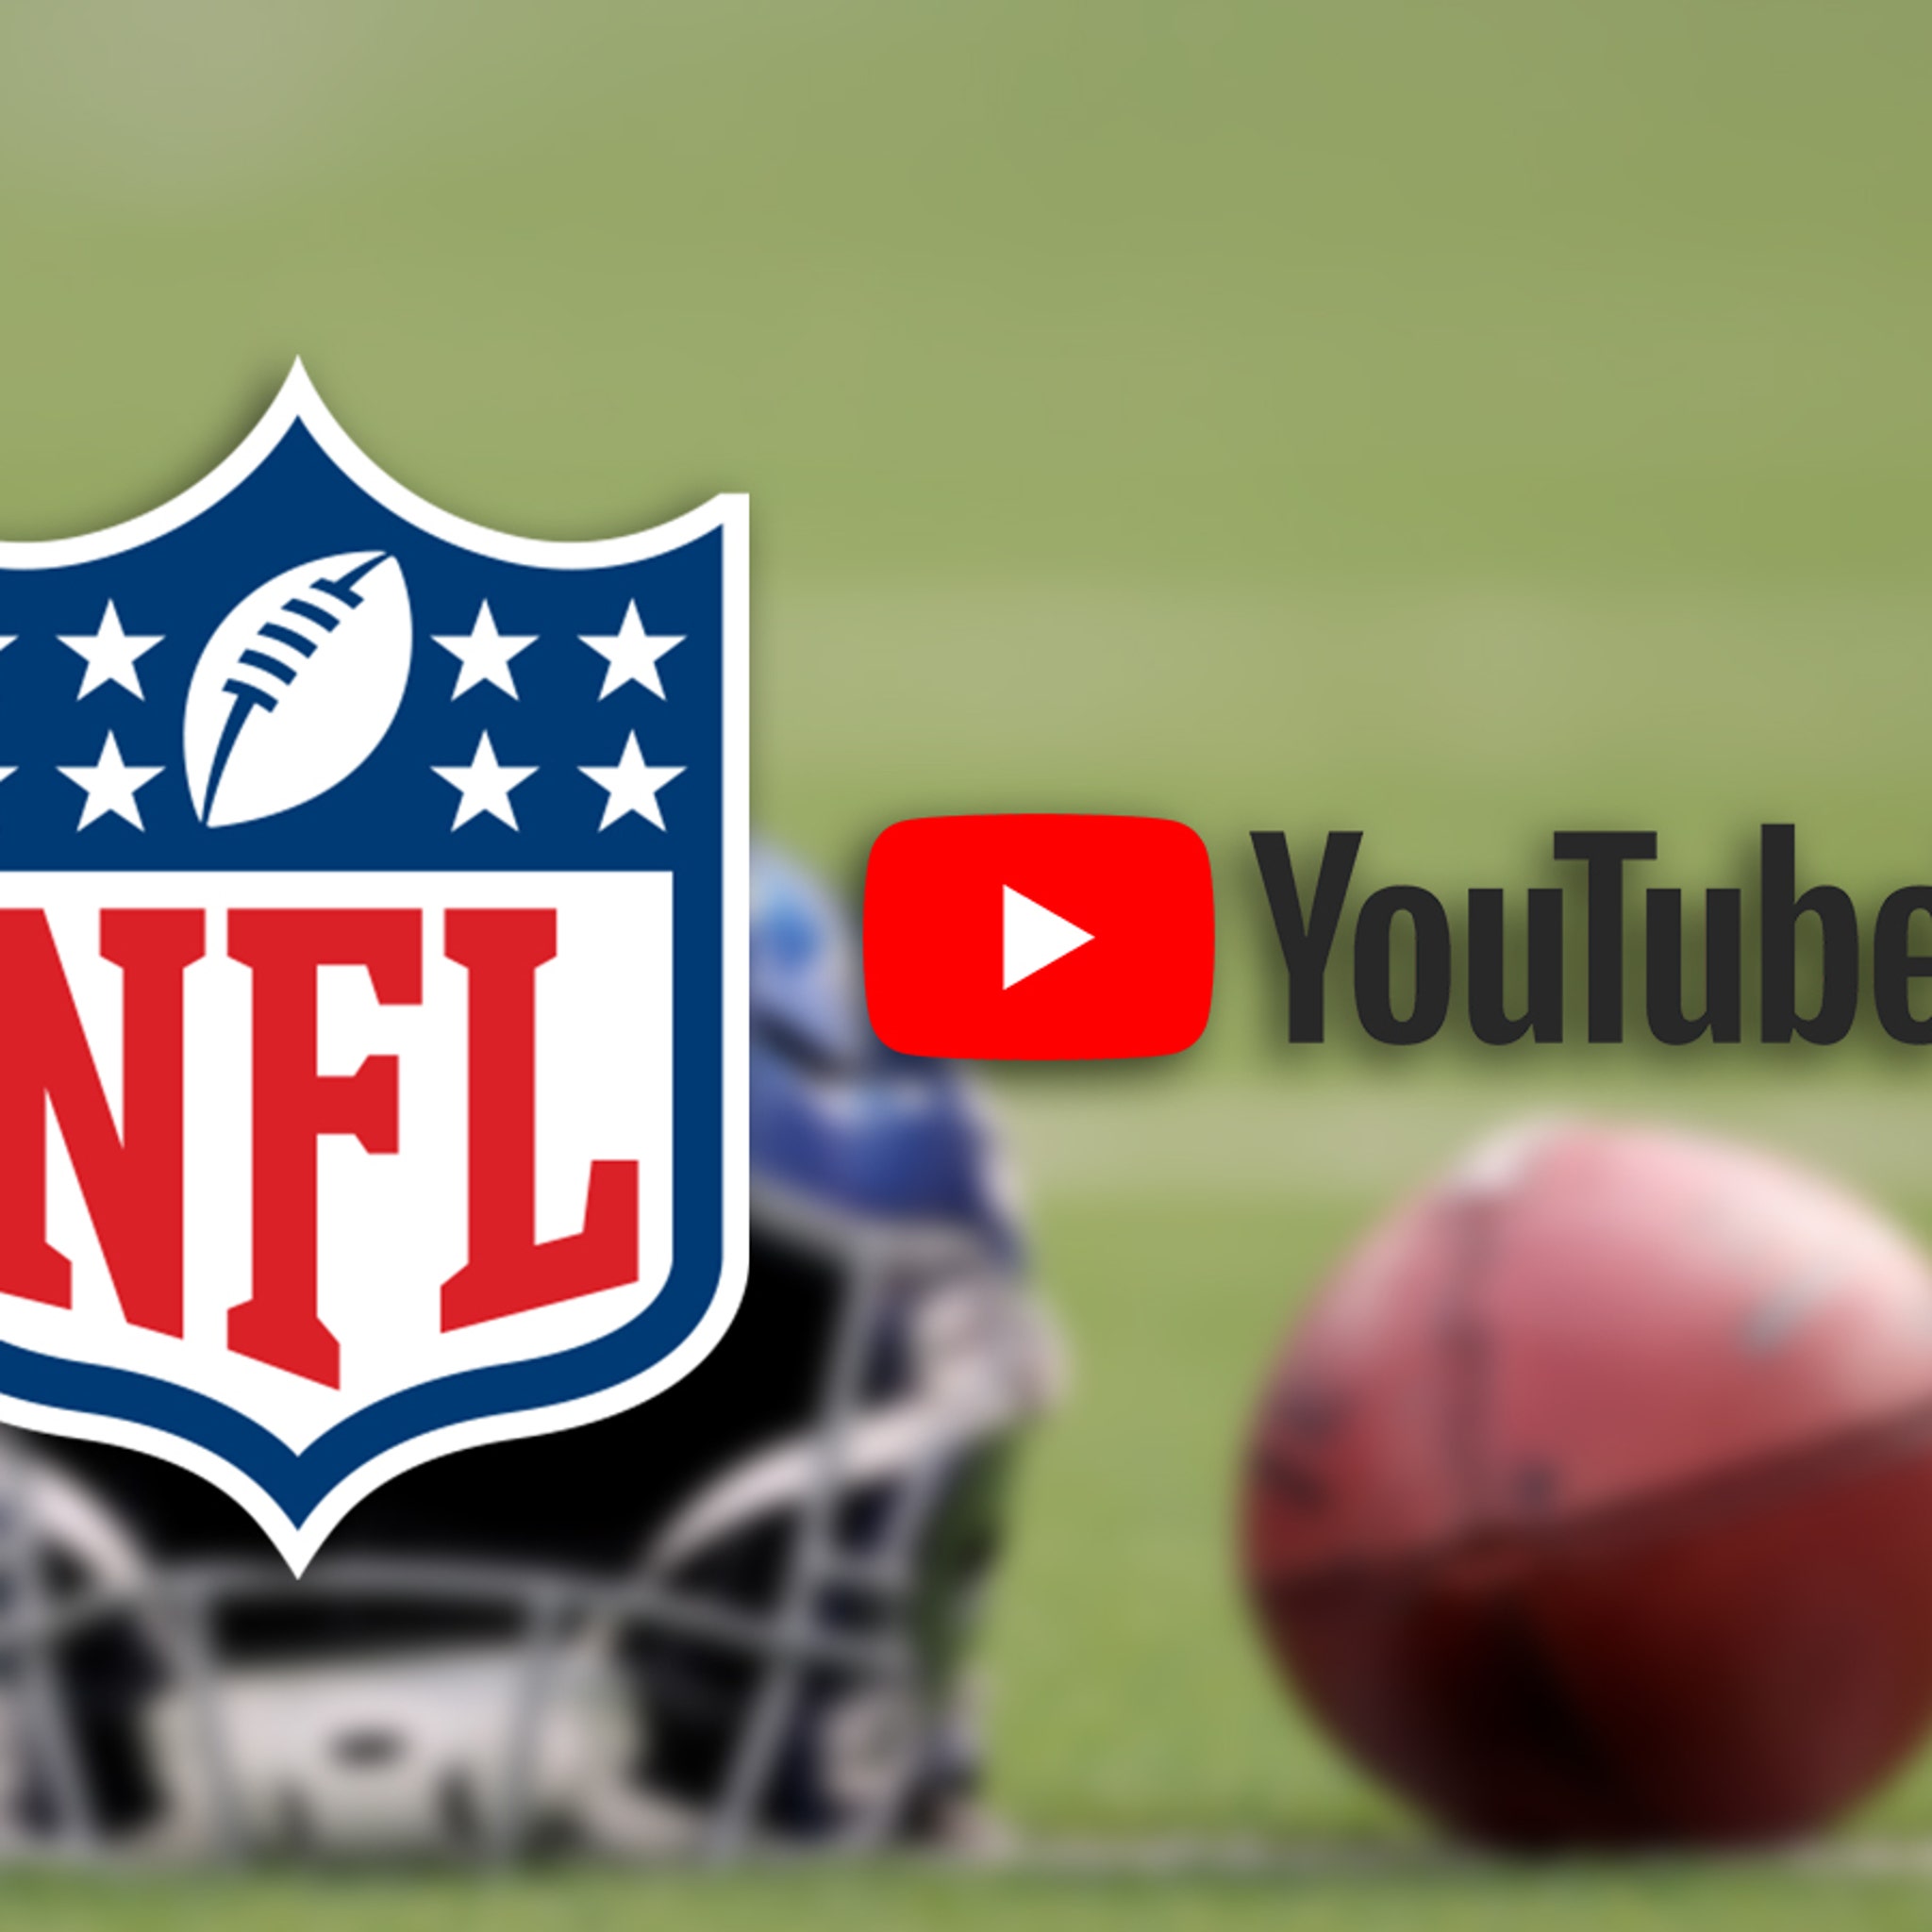 youtube nfl ticket deal